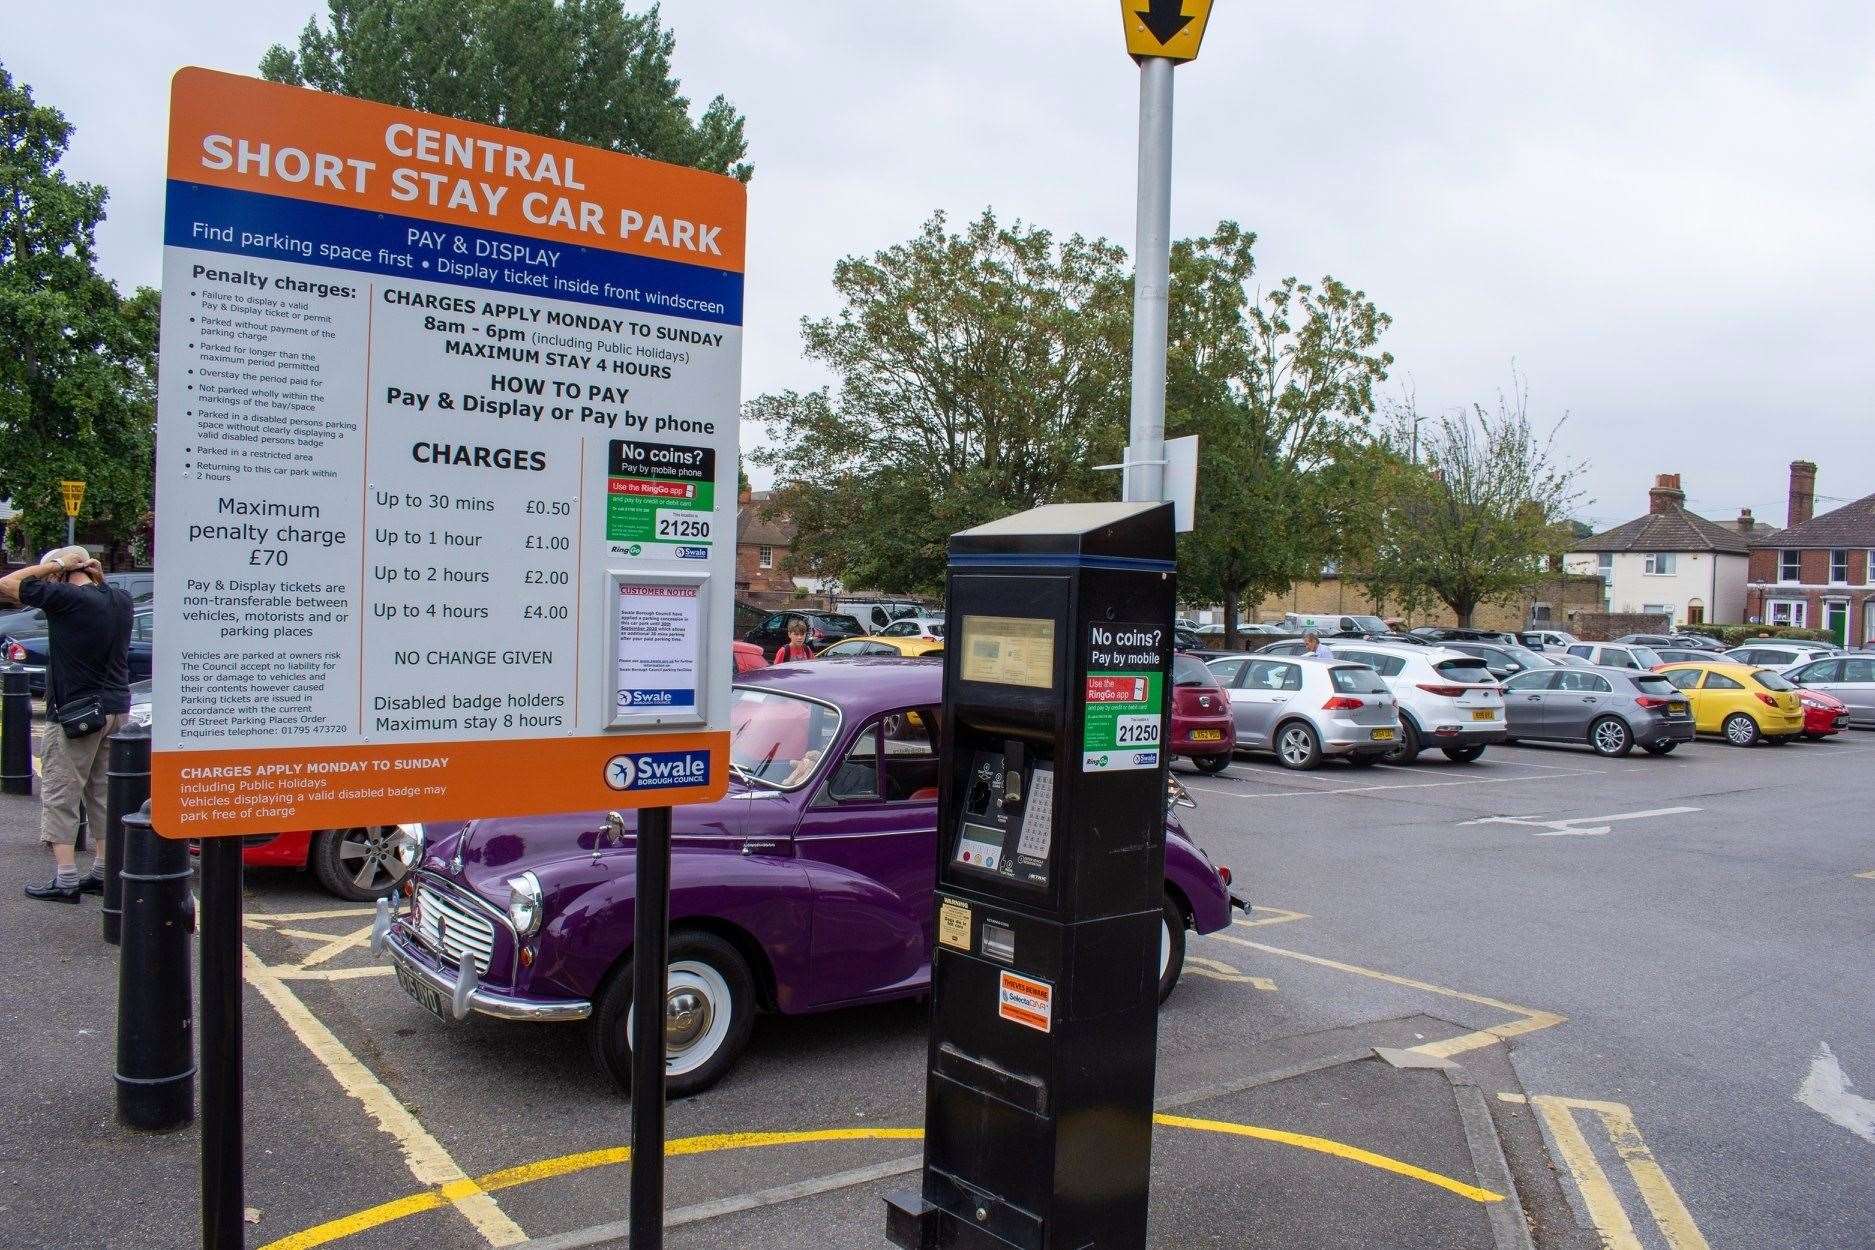 Central car park in Faversham is among those where free parking in the evening is being axed